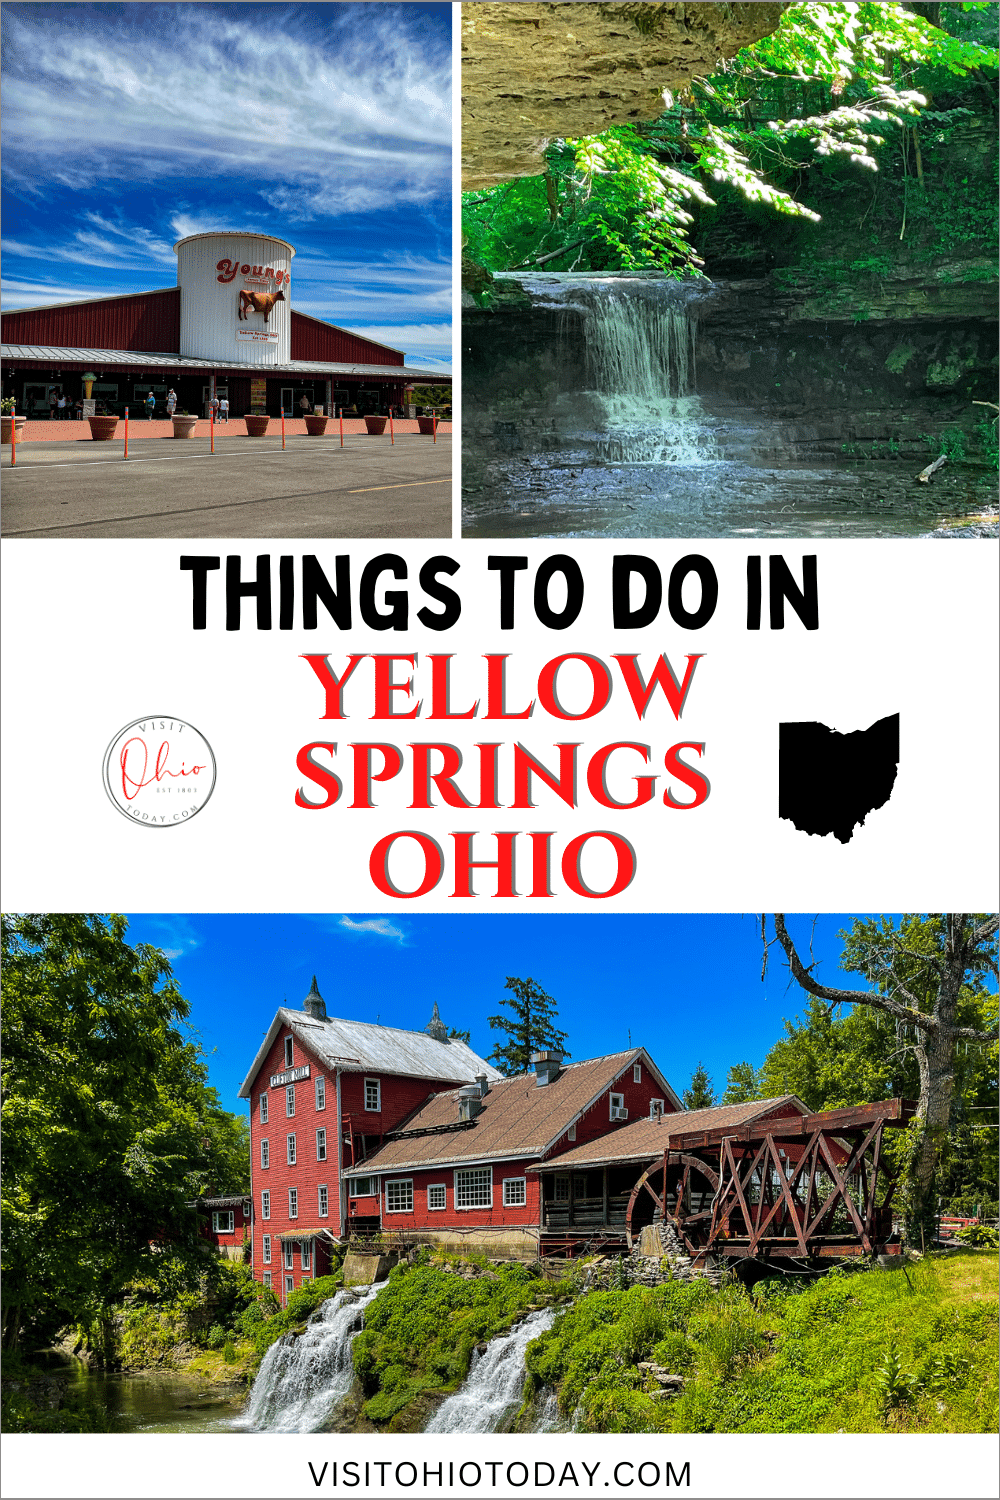 vertical image for pinterest with photos of young's jersey dairy, glen helen nature preserve and clifton mill. A white strip across the middle has the text Things to do in Yellow Springs Ohio and a black map of Ohio and the visitohiotoday round logo